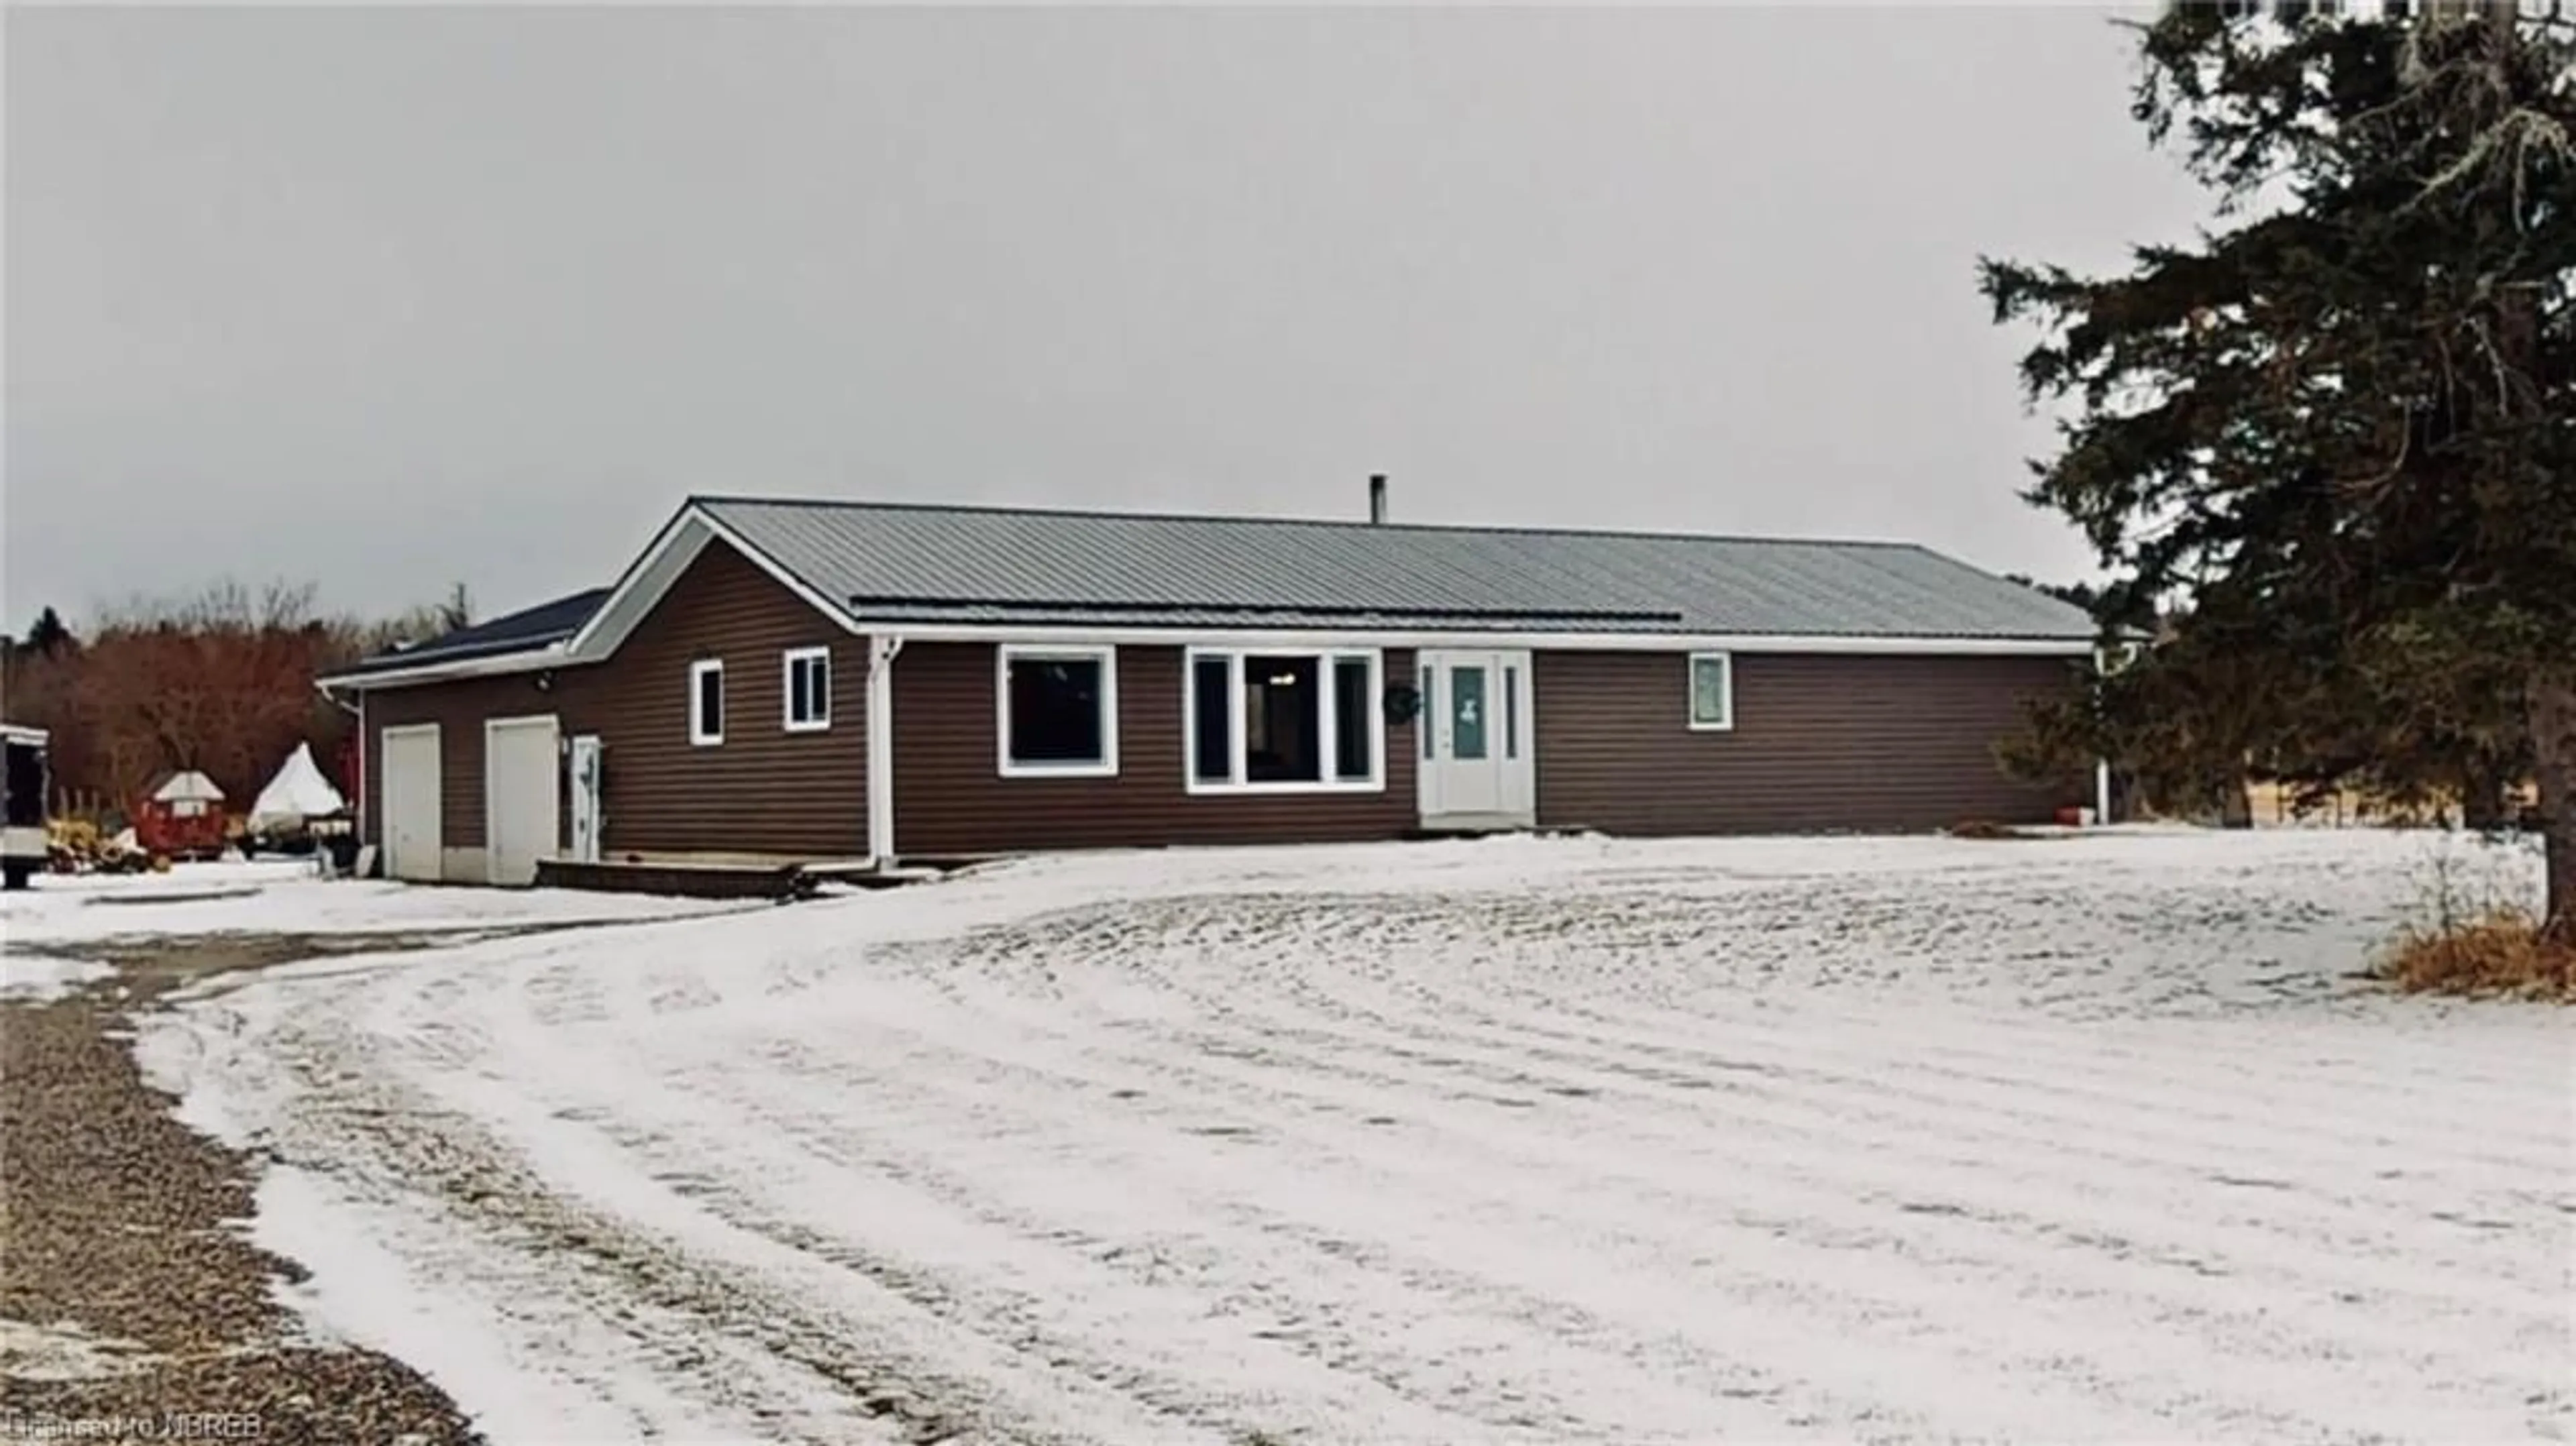 Home with unknown exterior material for 2039 Hwy 654, Callander Ontario P0H 1H0